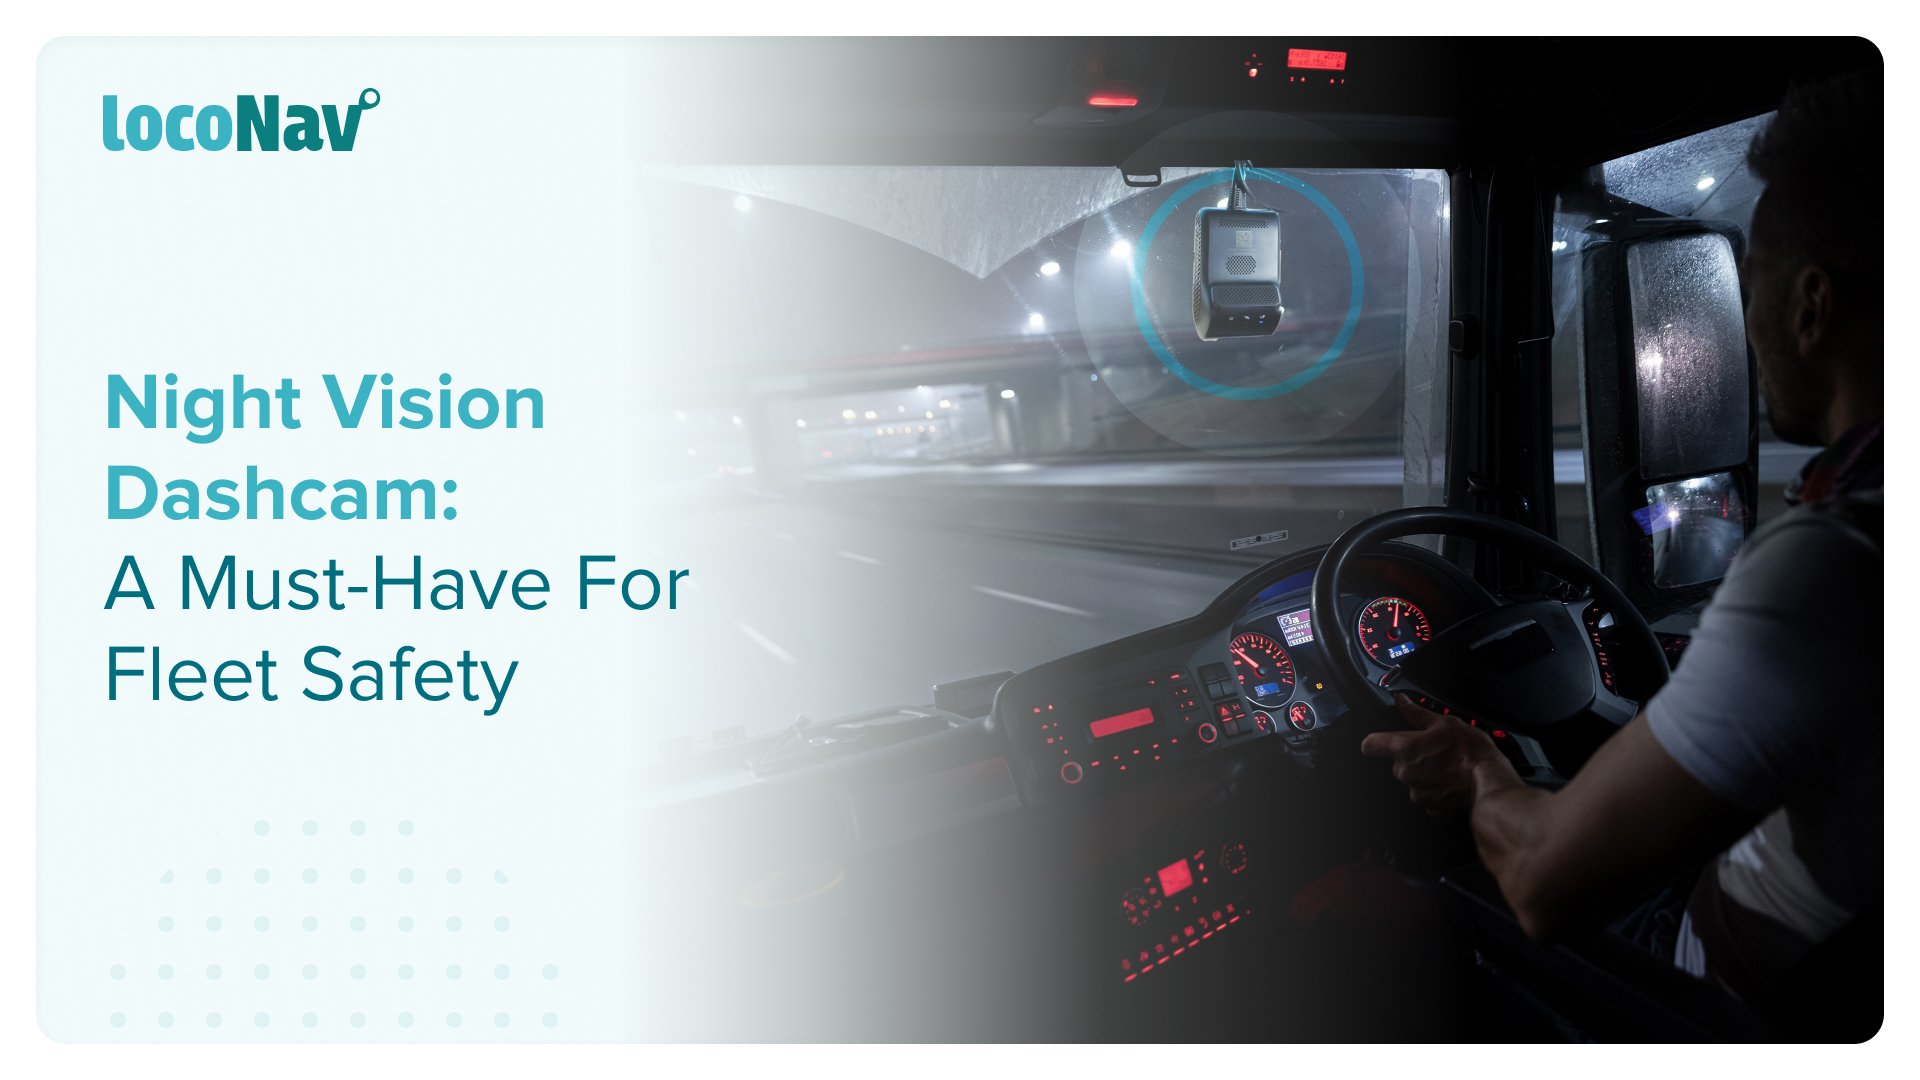 Night Vision Dashcam: A Must-Have For Fleet Safety